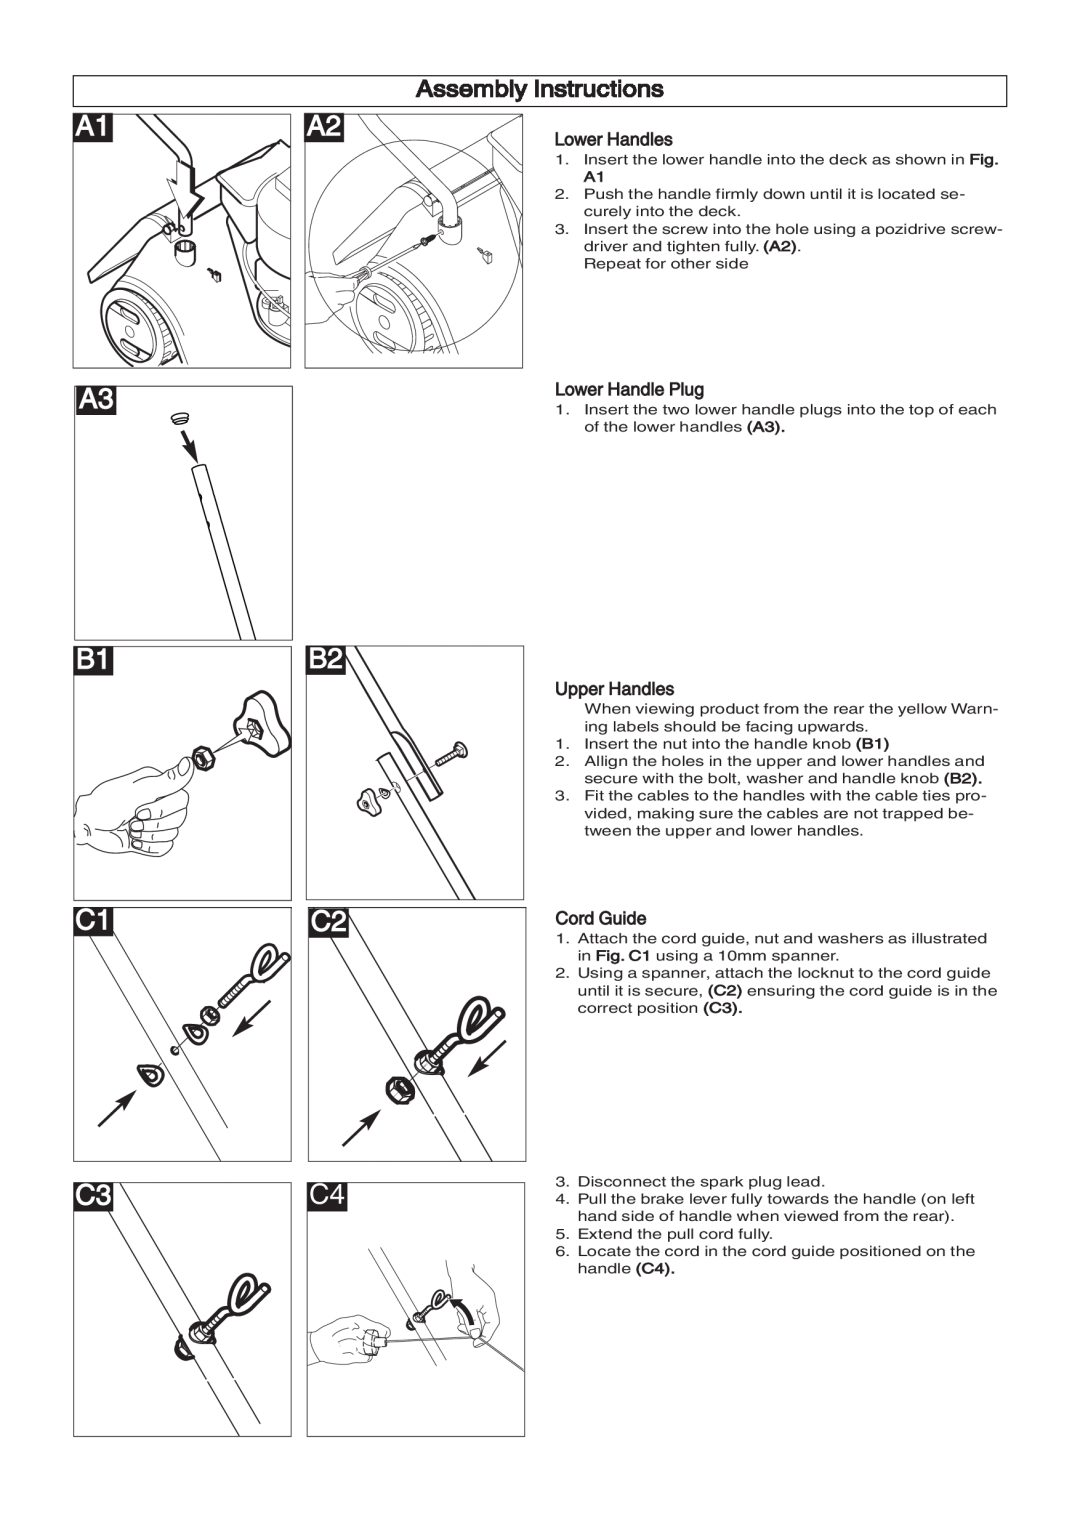 Husqvarna 965969501, 965969201 manual Assembly Instructions, Lower Handles, Lower Handle Plug, Upper Handles, Cord Guide 